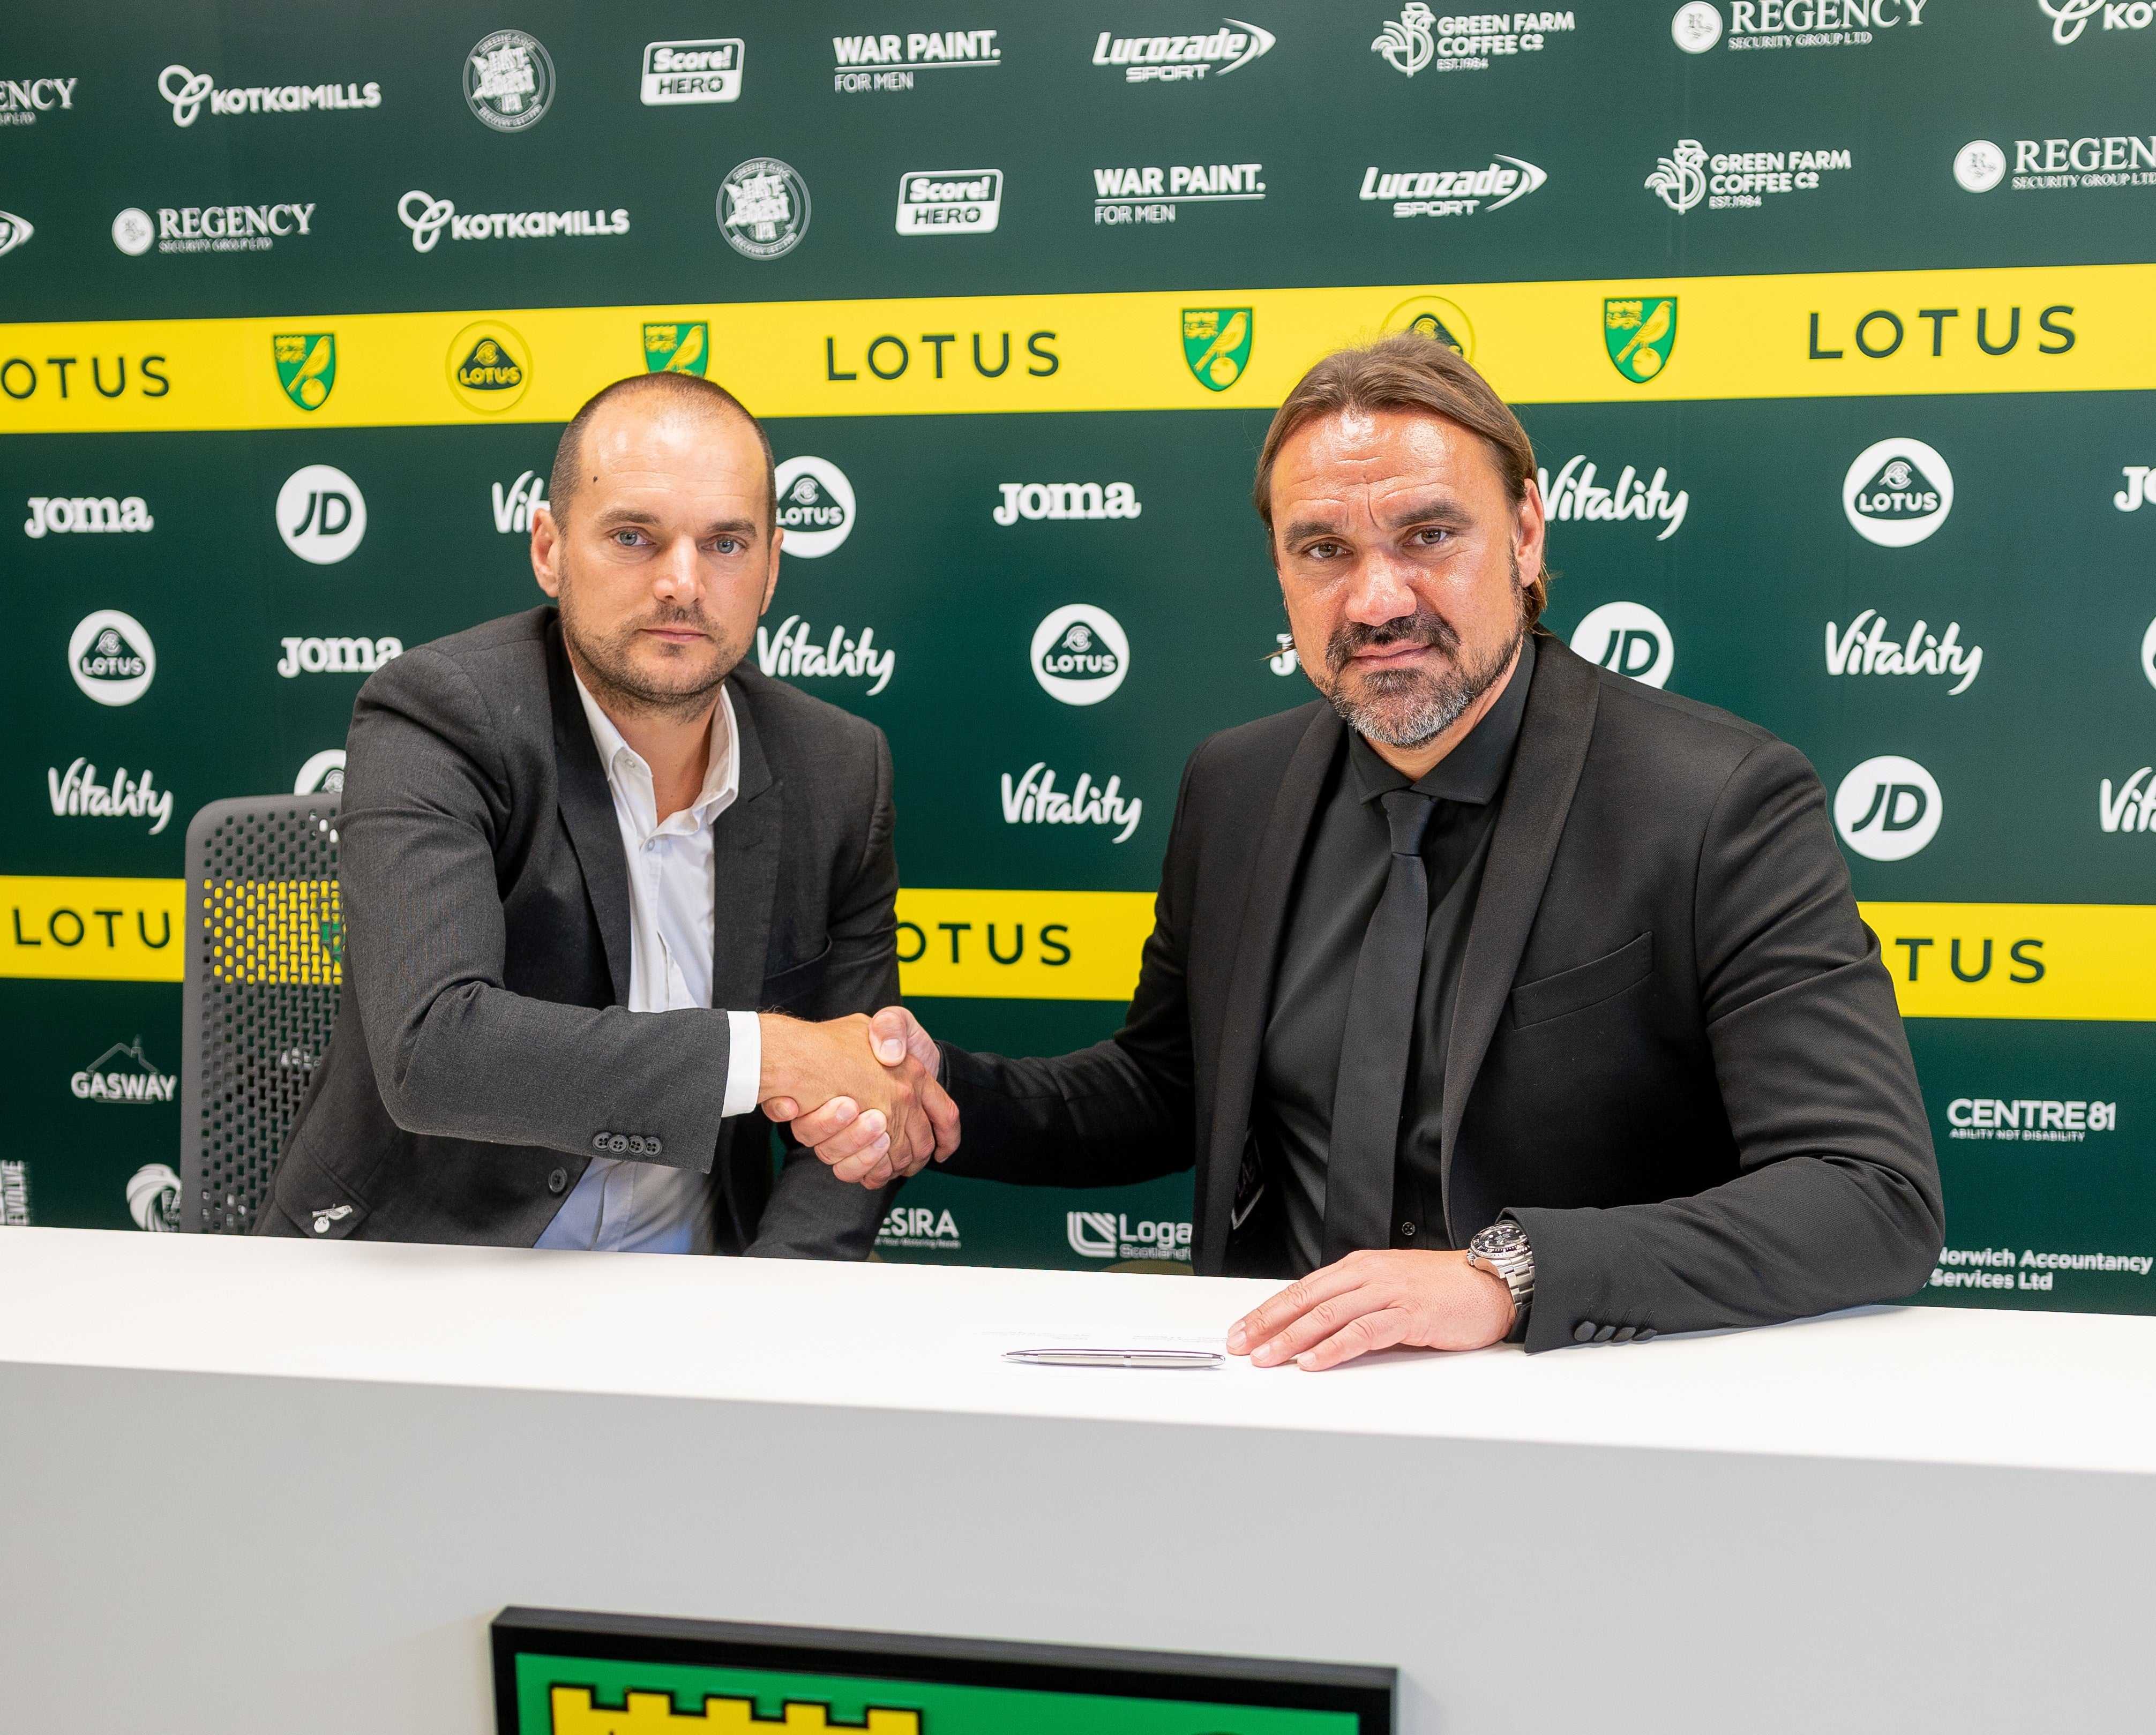 Norwich head coach Daniel Farke has signed a new contract at the club, pictured on right, alongside sporting director Stuart Webber